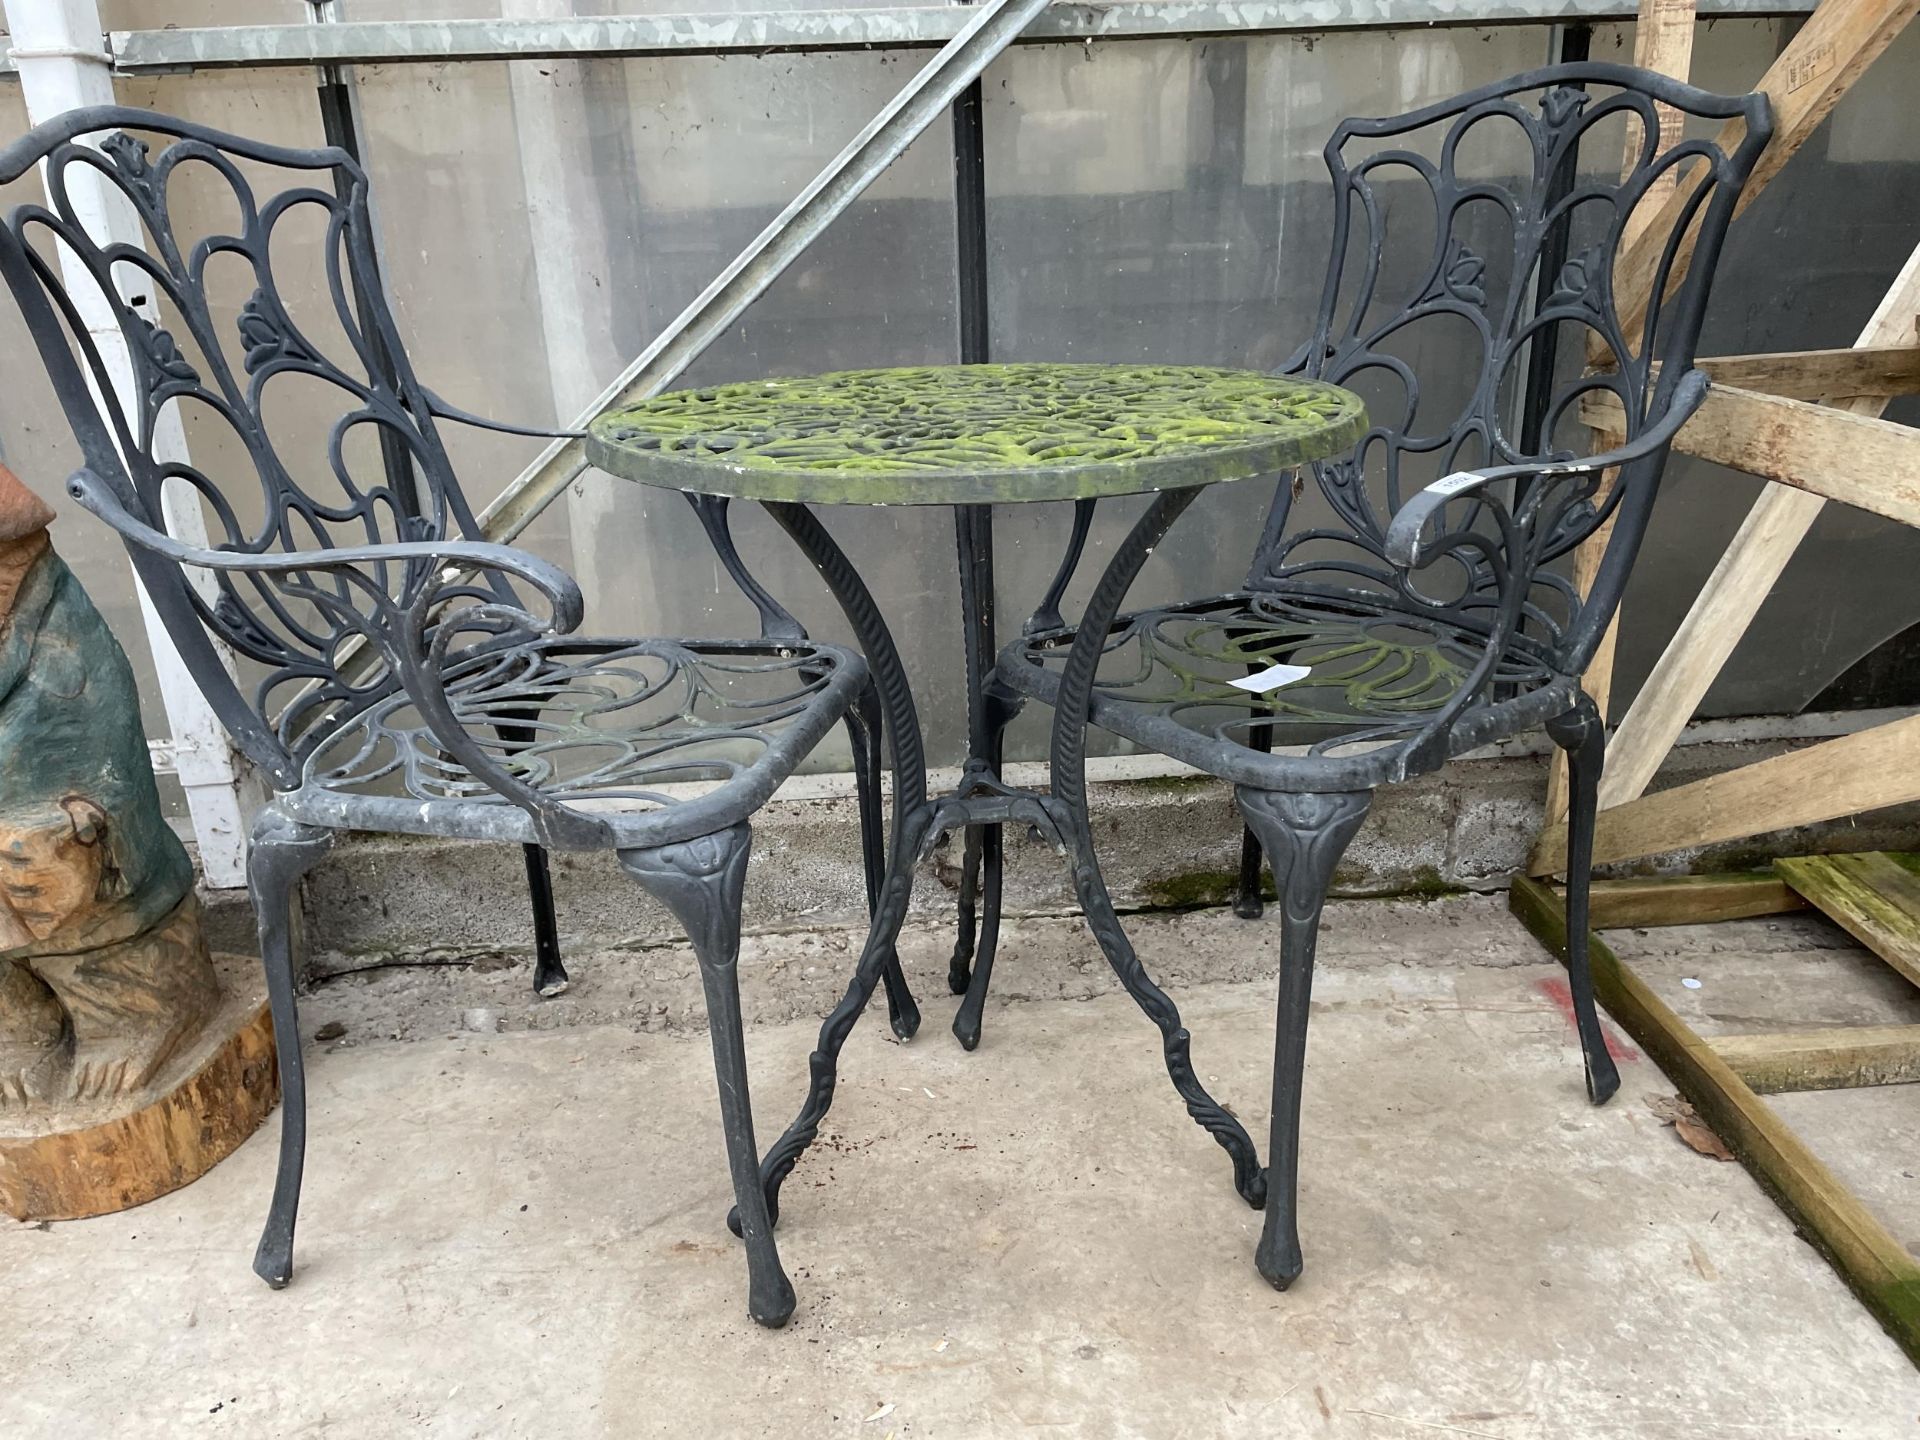 A METAL BISTRO SET COMPRISING OF A ROUND TABLE AND TWO CHAIRS - Image 2 of 3